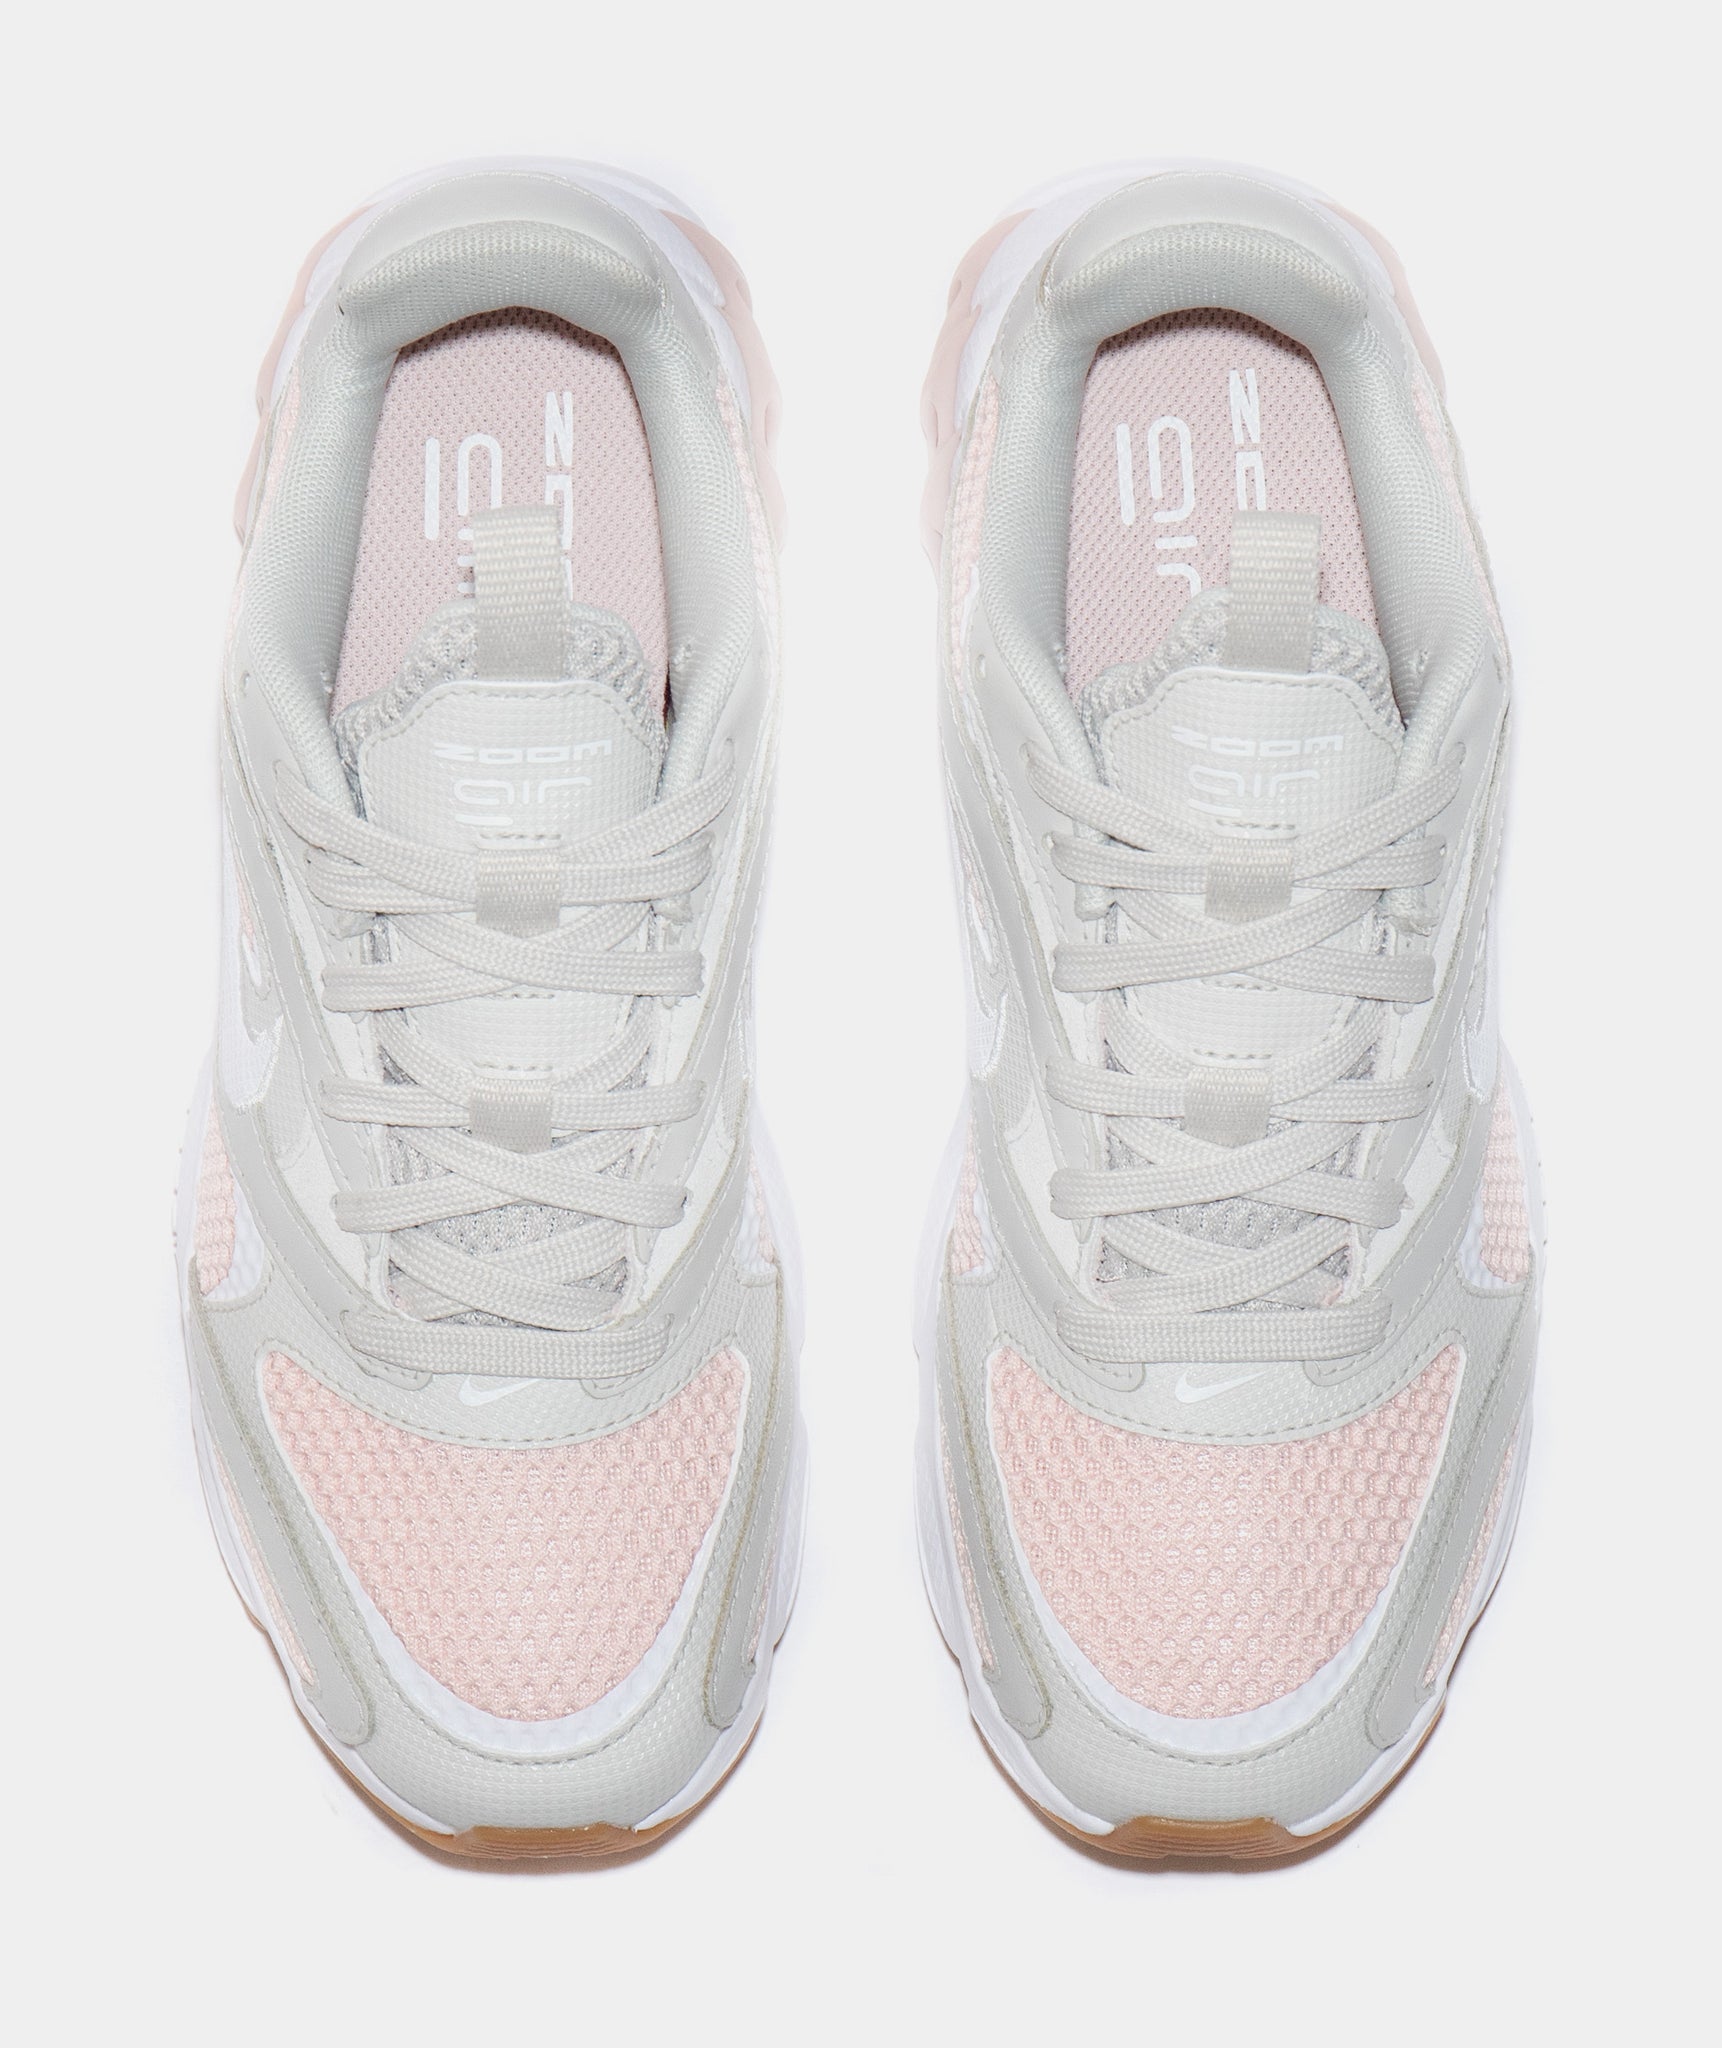 Nike Zoom Air Fire Womens Lifestyle Shoe Coconut Milk Summit White Pink ...